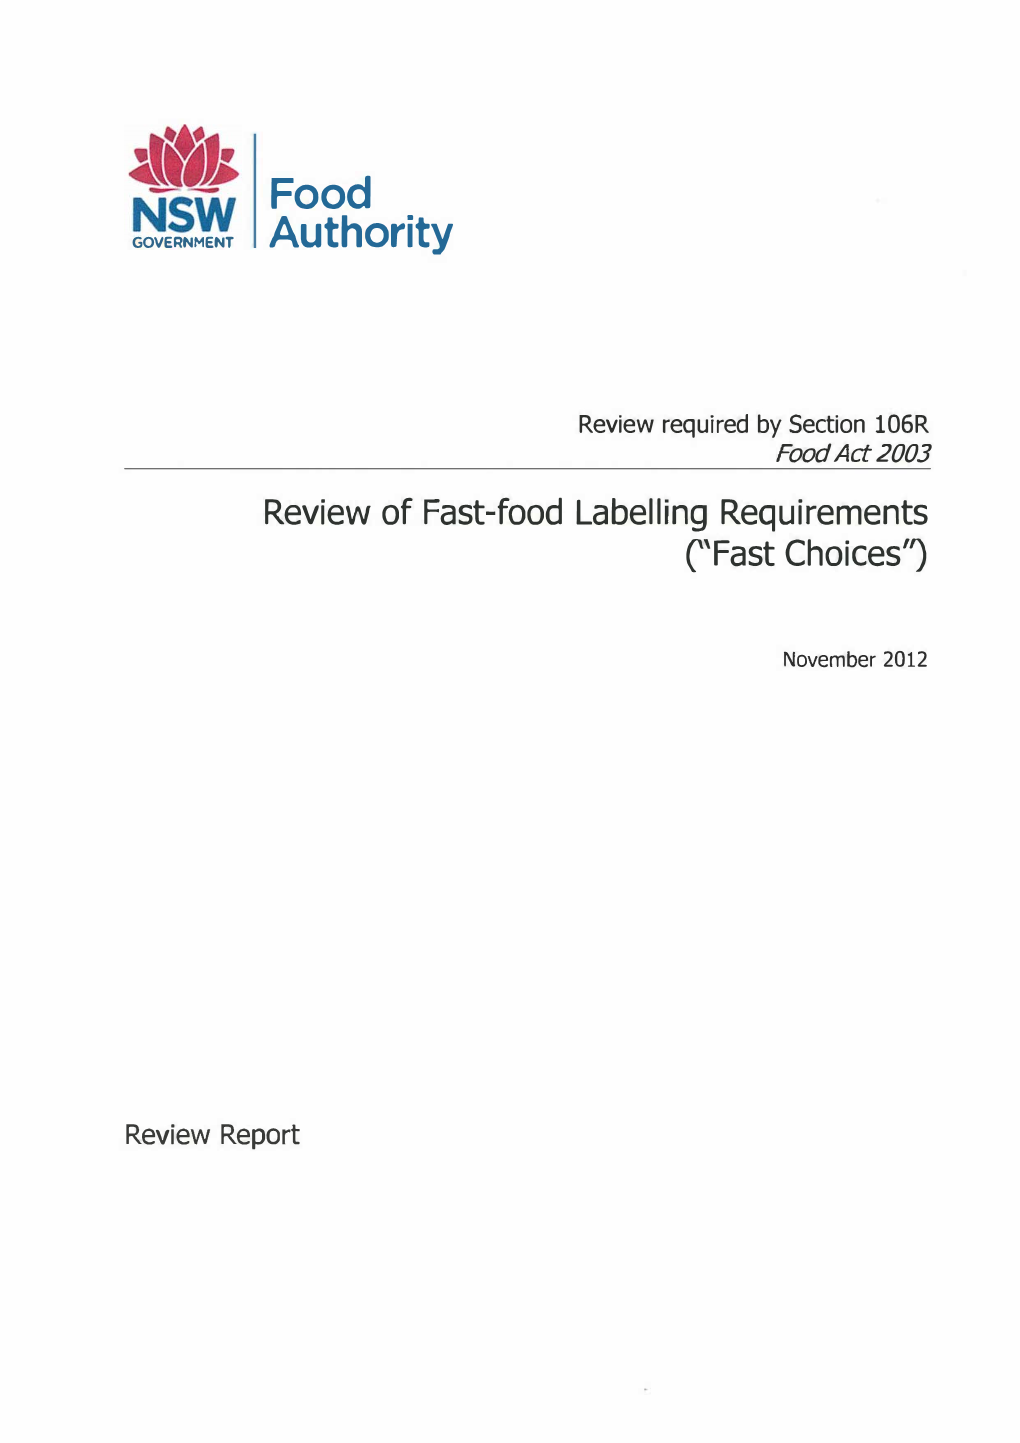 NSW Food Authority Review of Fast-Food